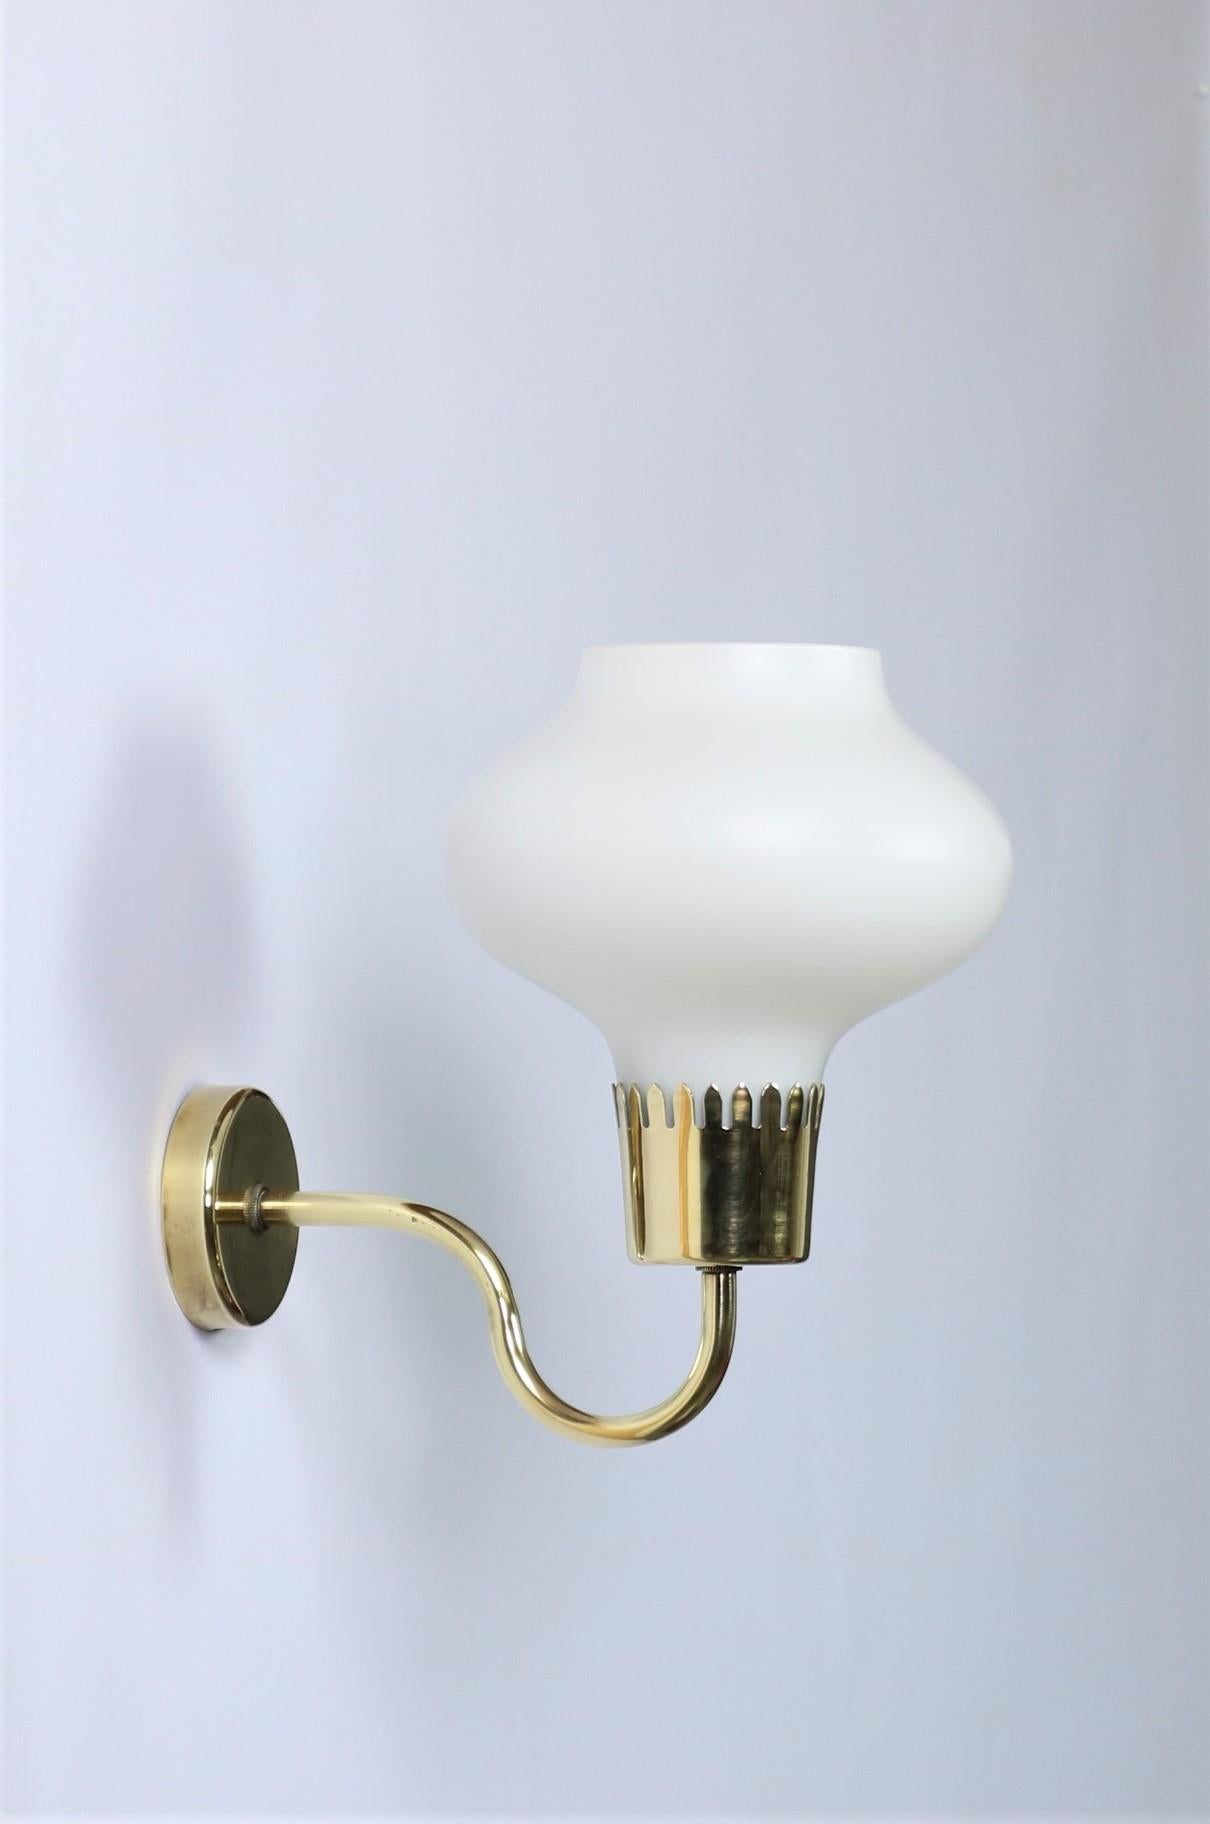 Set of Danish Modern Brass and Opal Glass Wall Sconces by Acton Bjorn, 1950s For Sale 2